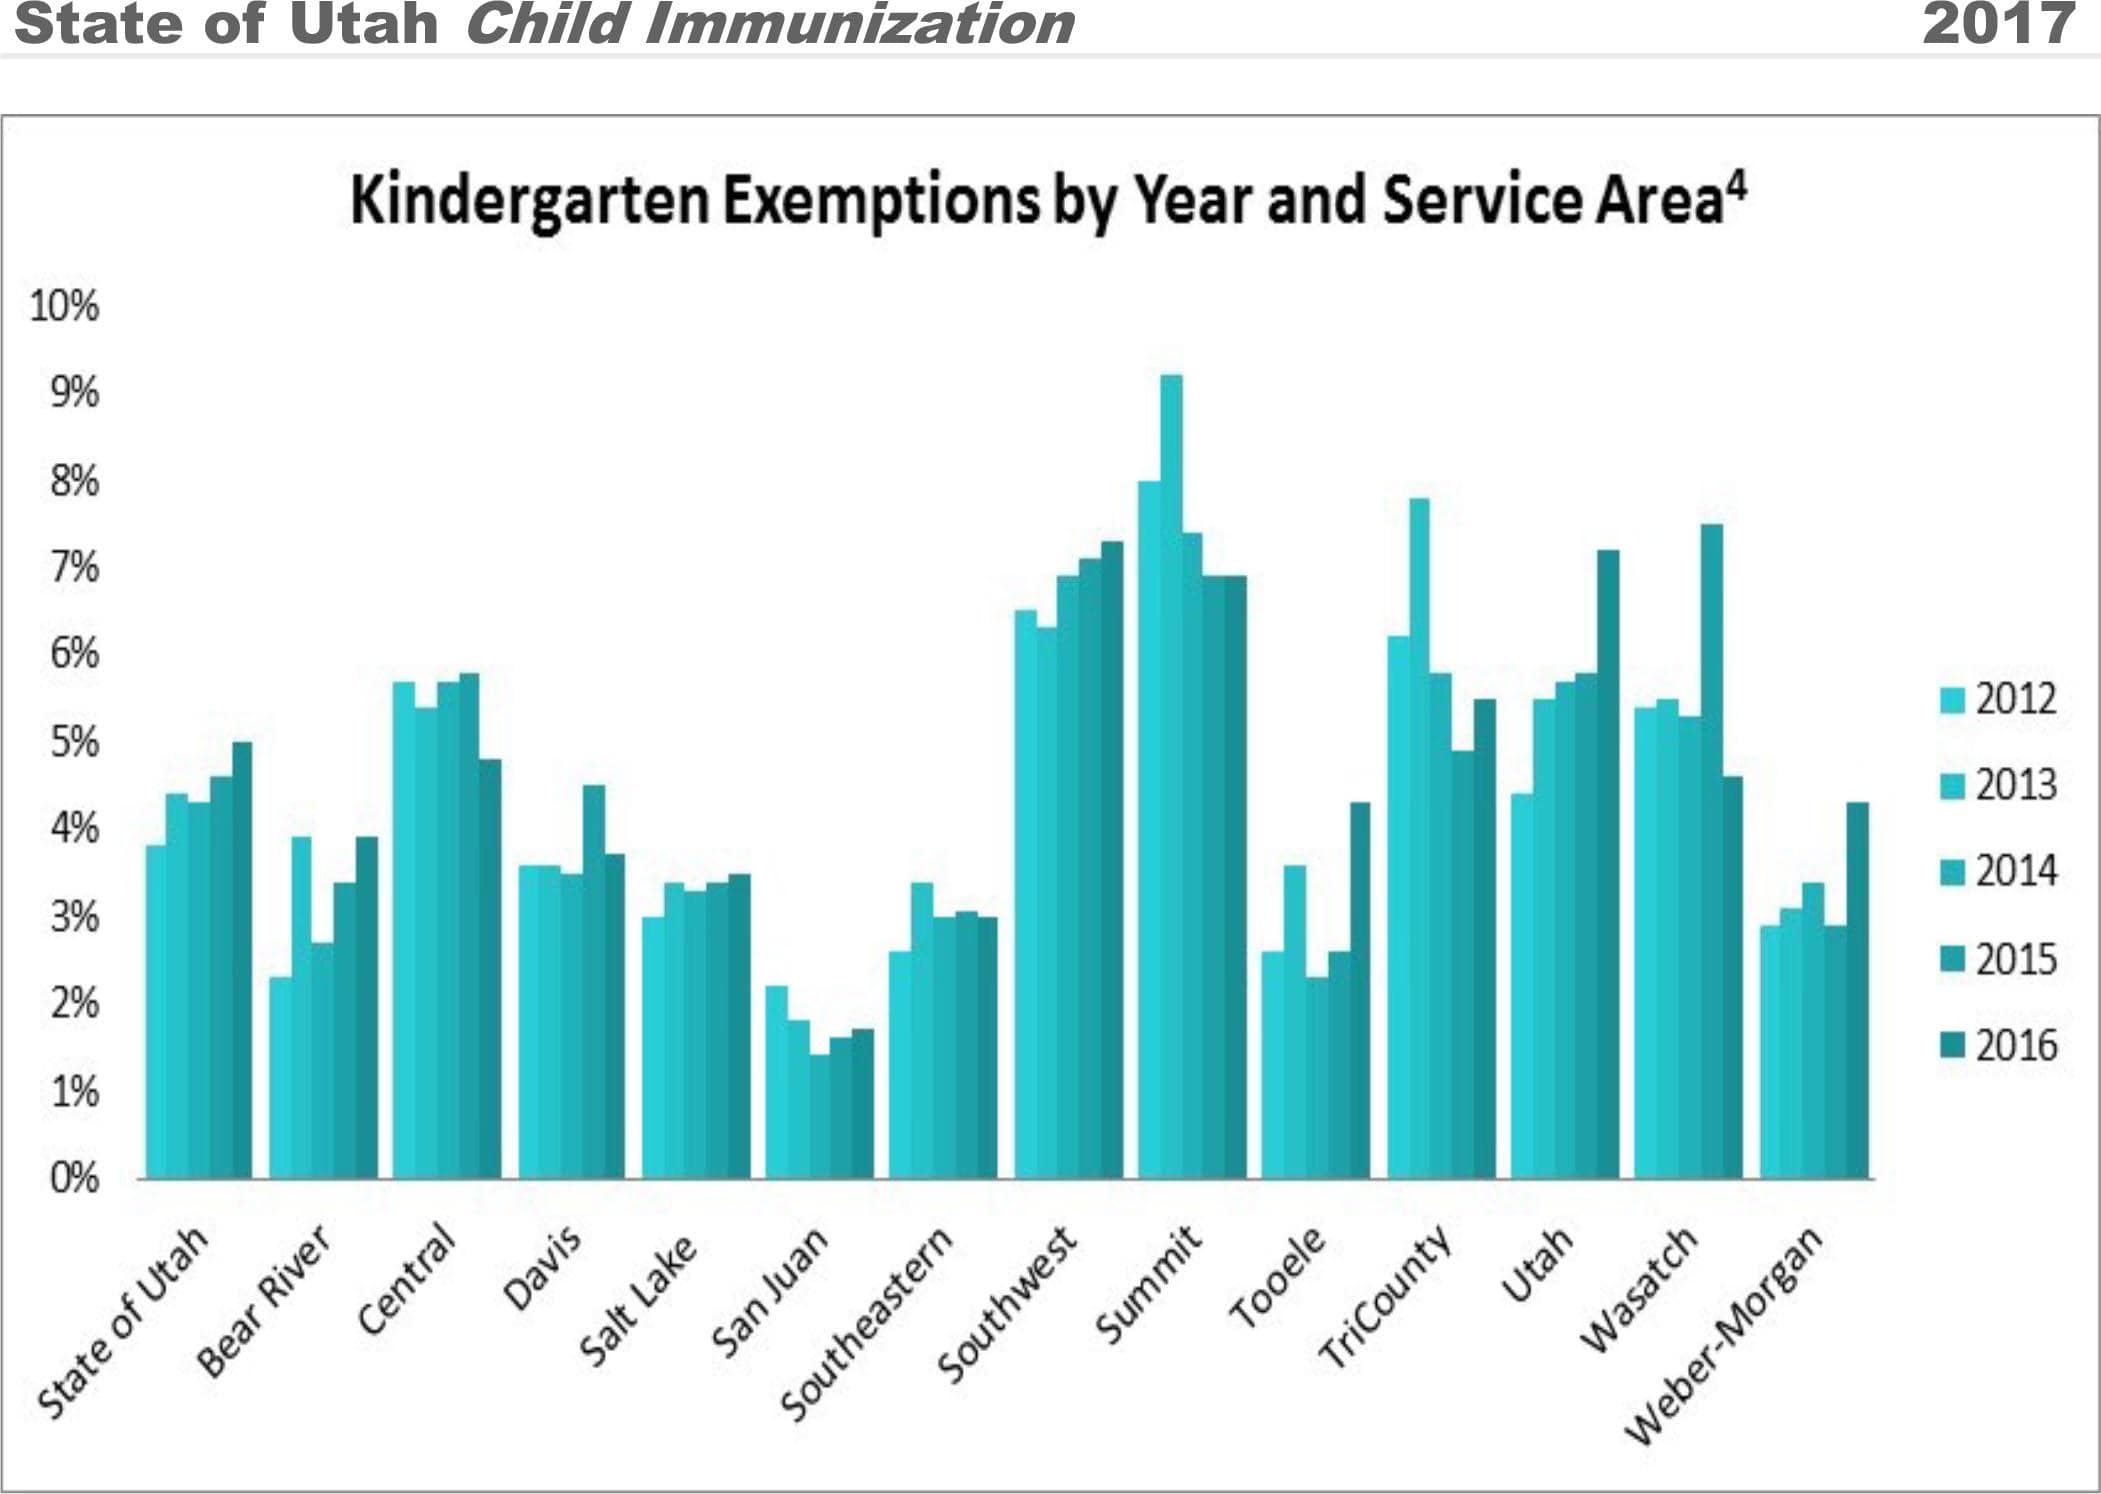 a blue and green bar graph showing the number of kindergarten exemptions of immunizations in the state of utah by year